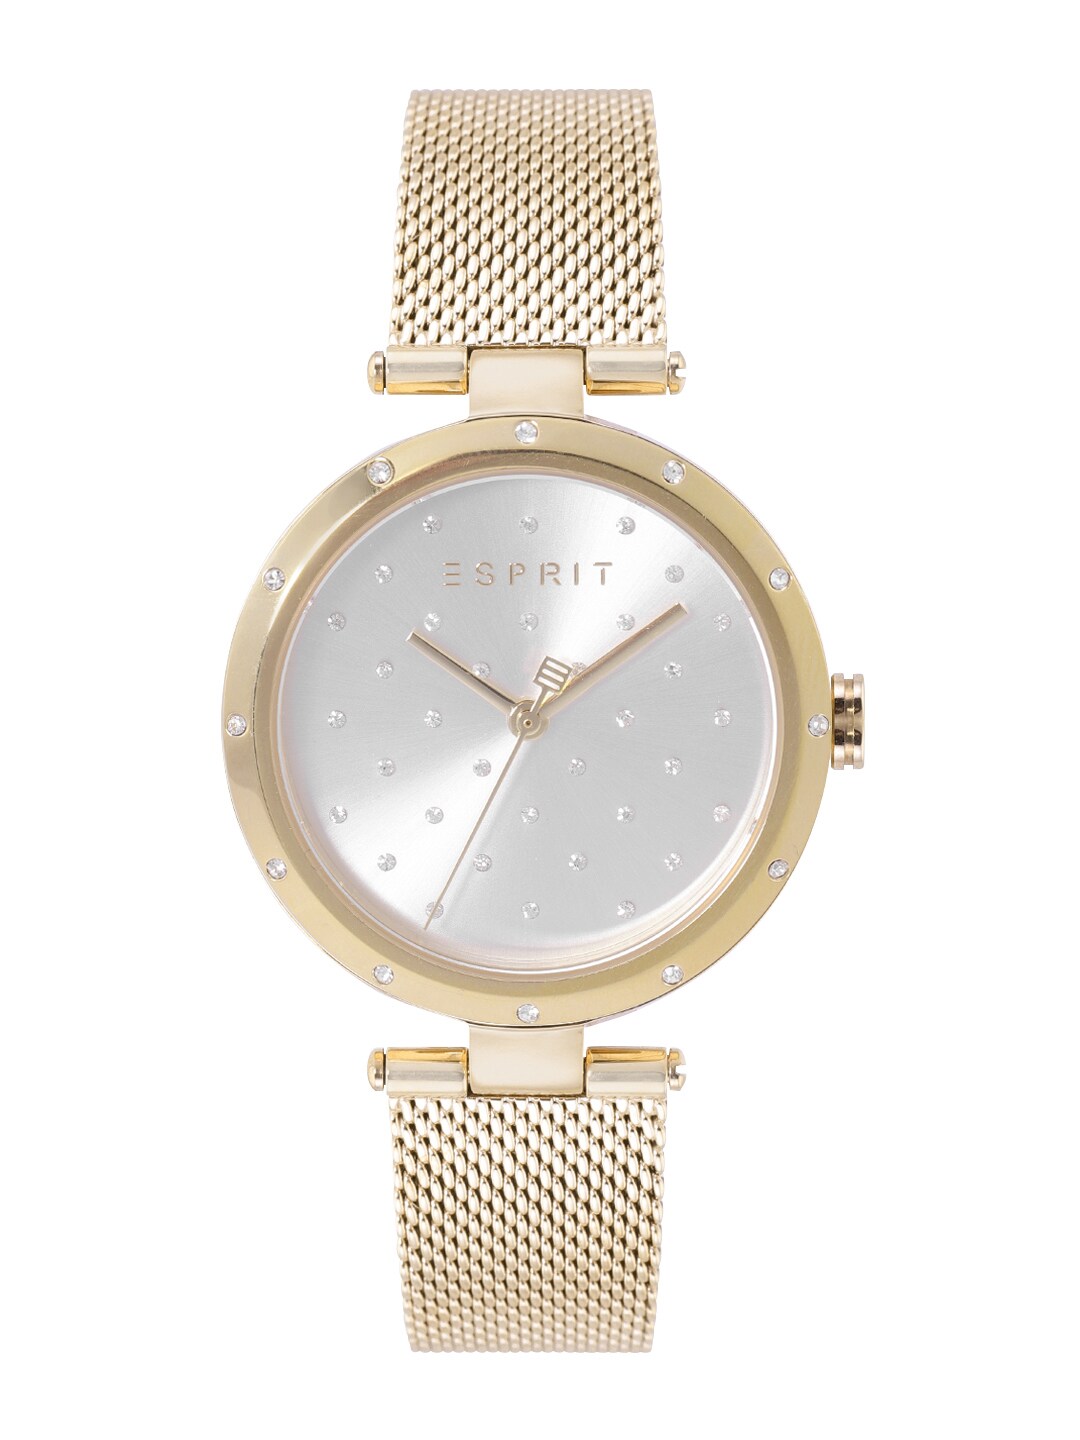 ESPRIT Women Silver-Toned Embellished Analogue Watch ES1L214M0065 Price in India